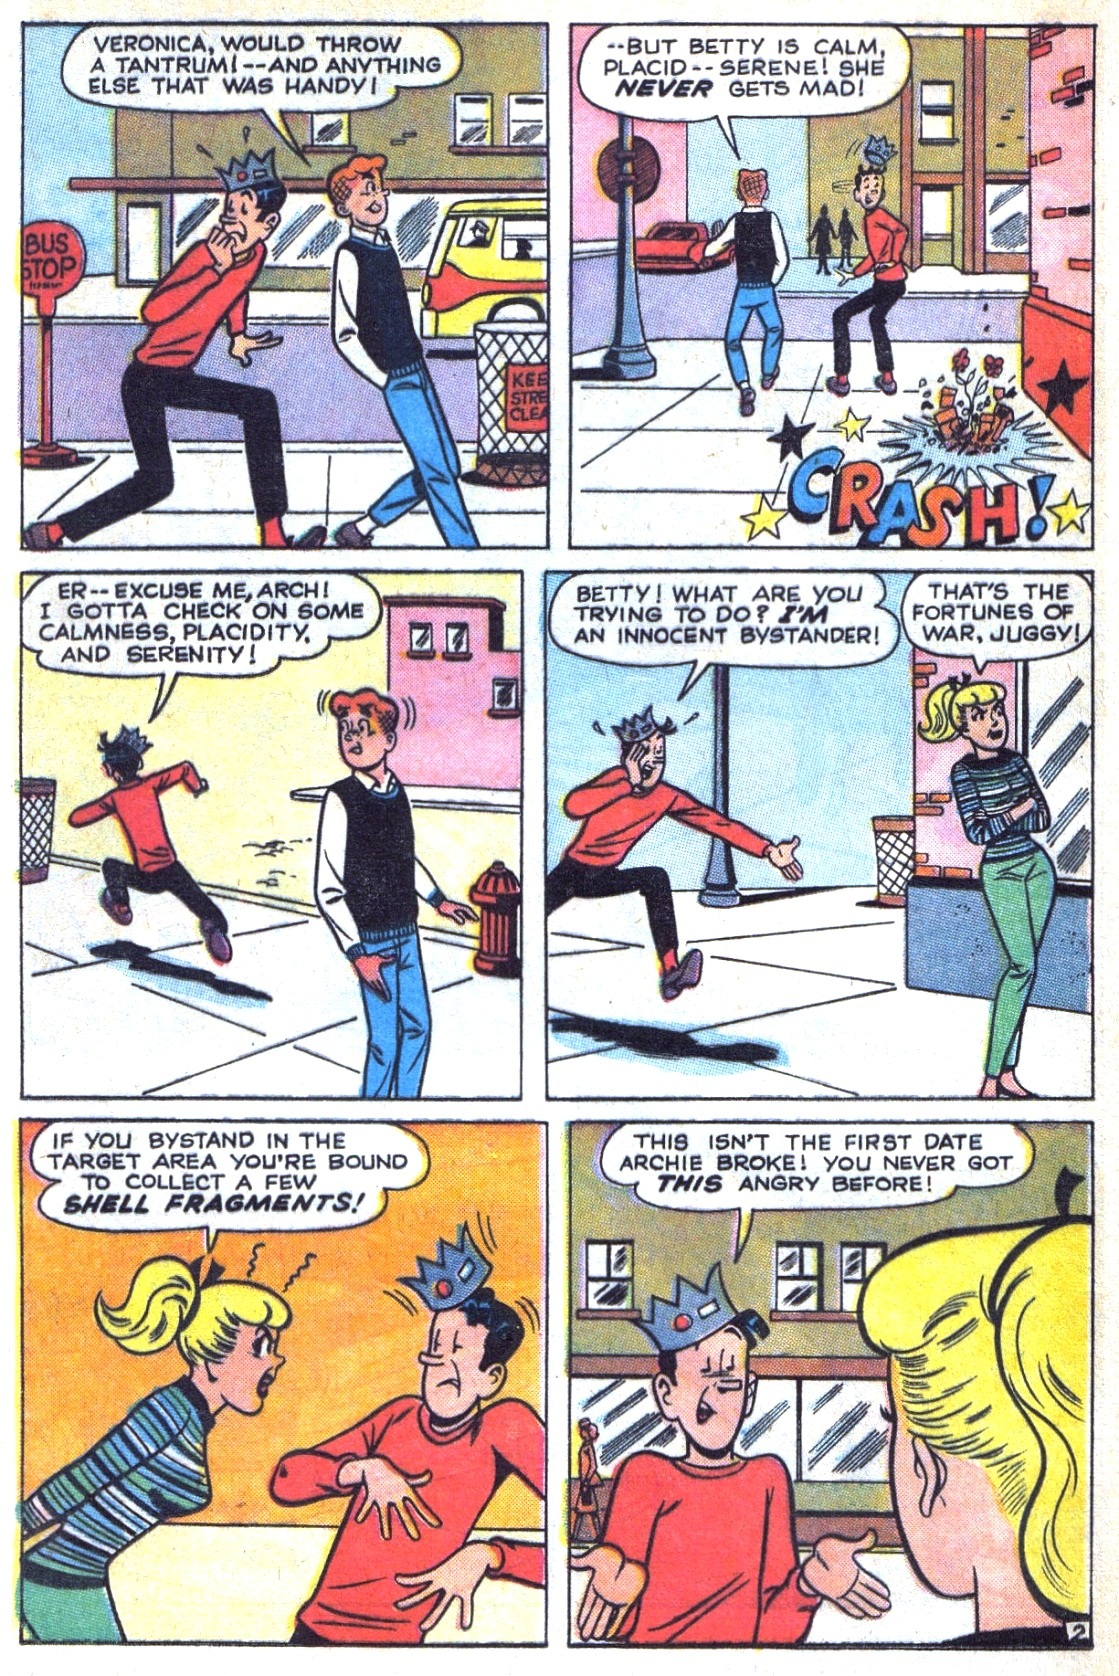 Archie (1960) 156 Page 4